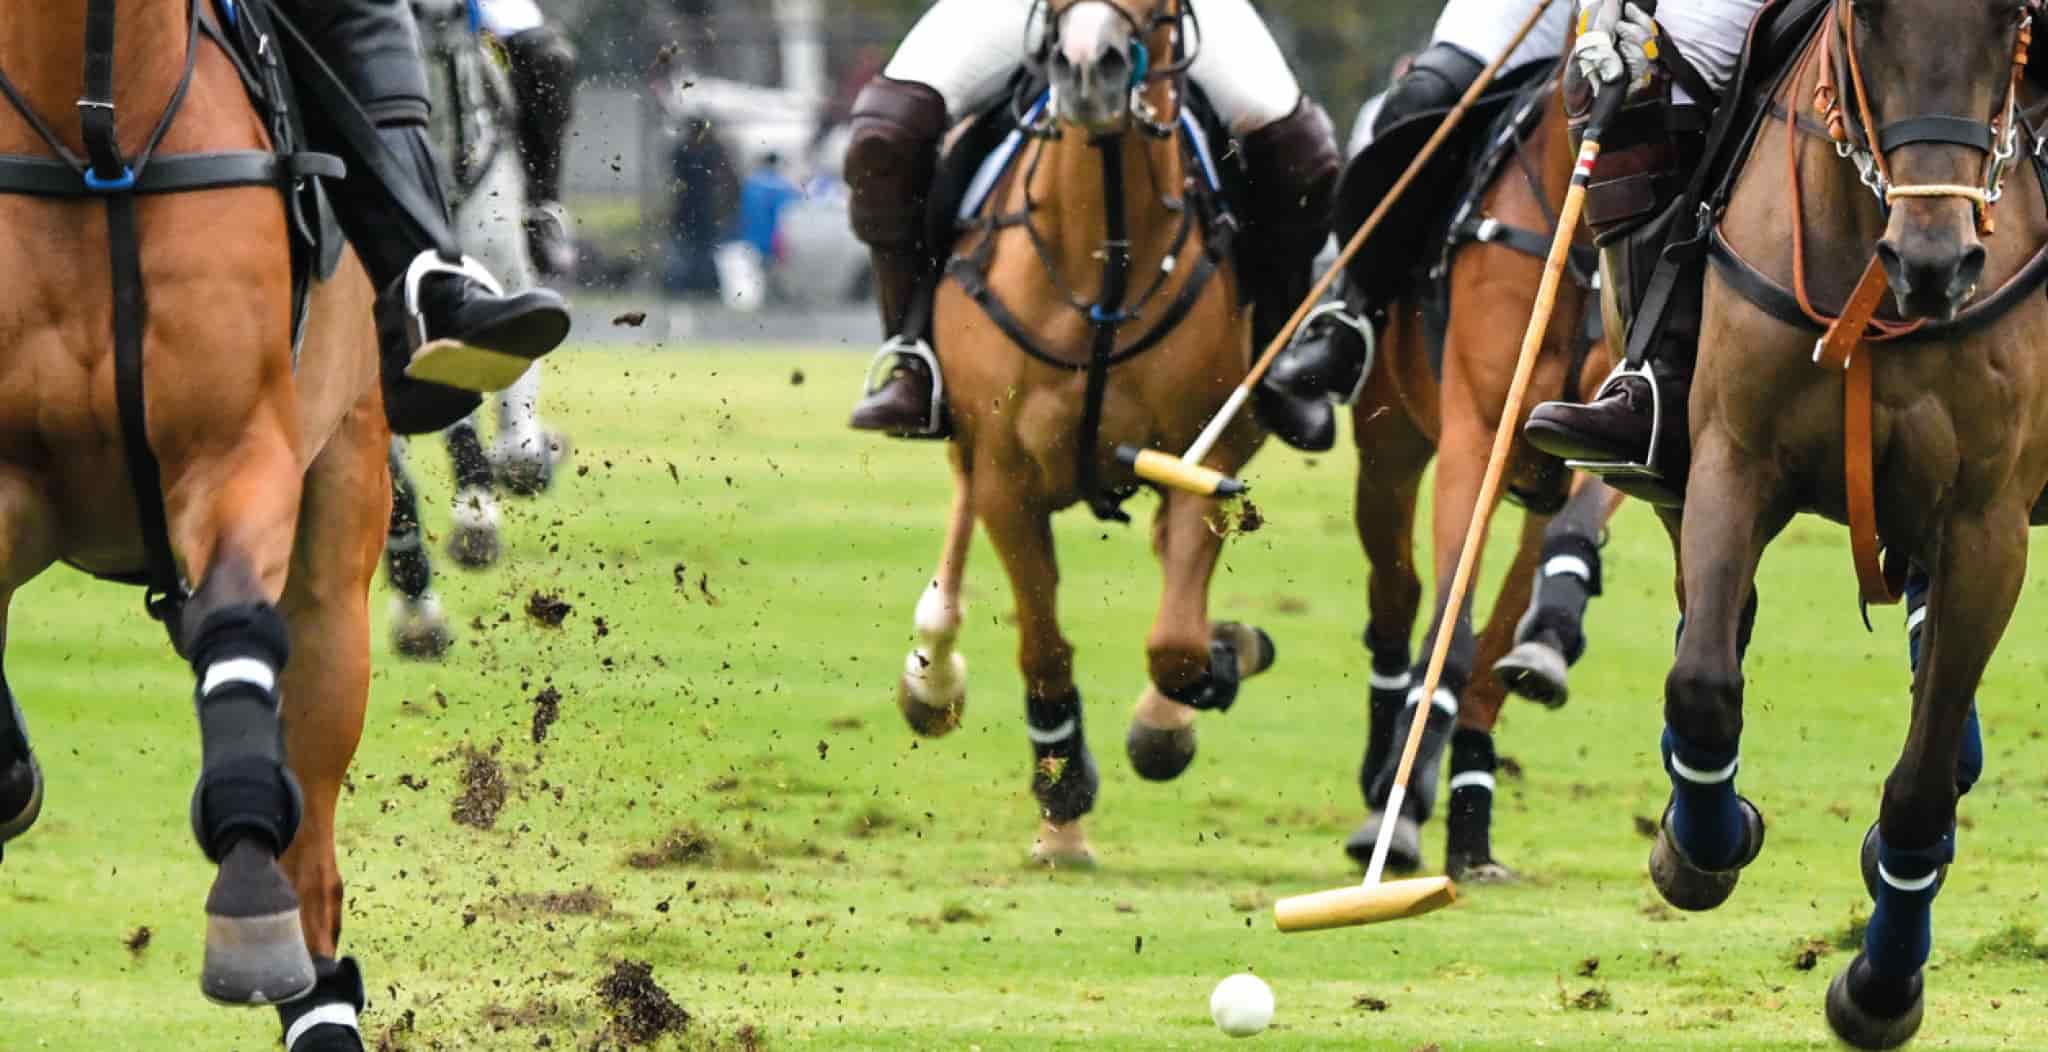 Polo | Common Breeds used as Polo Ponies and injuries they may suffer from